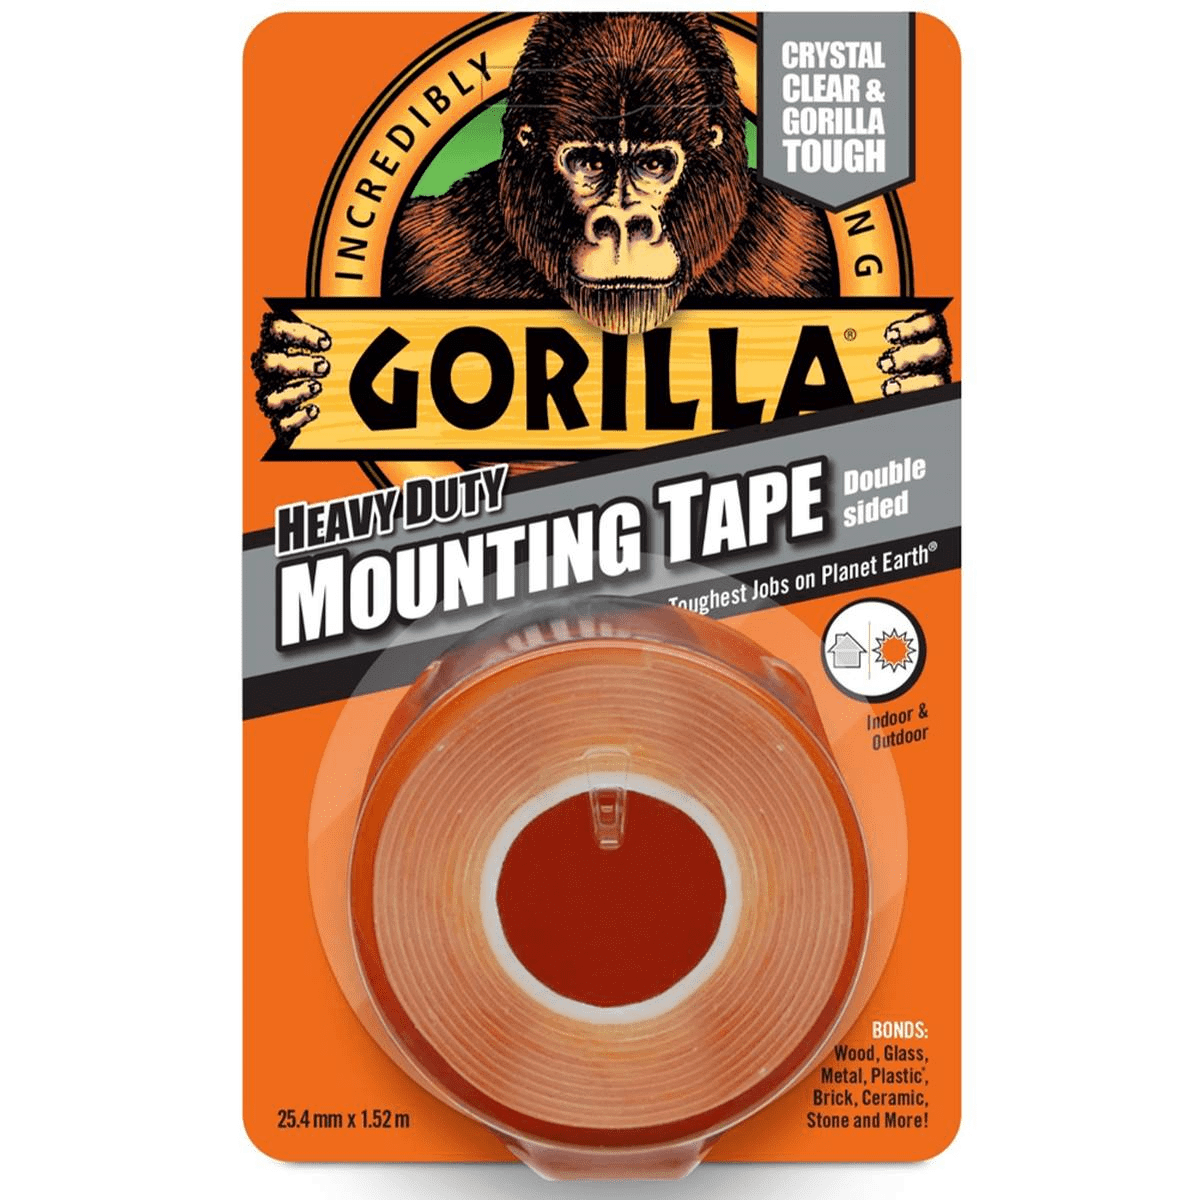 Gorilla Glue Heavy Duty Double Sided Mounting Tape, Clear, 1.5m